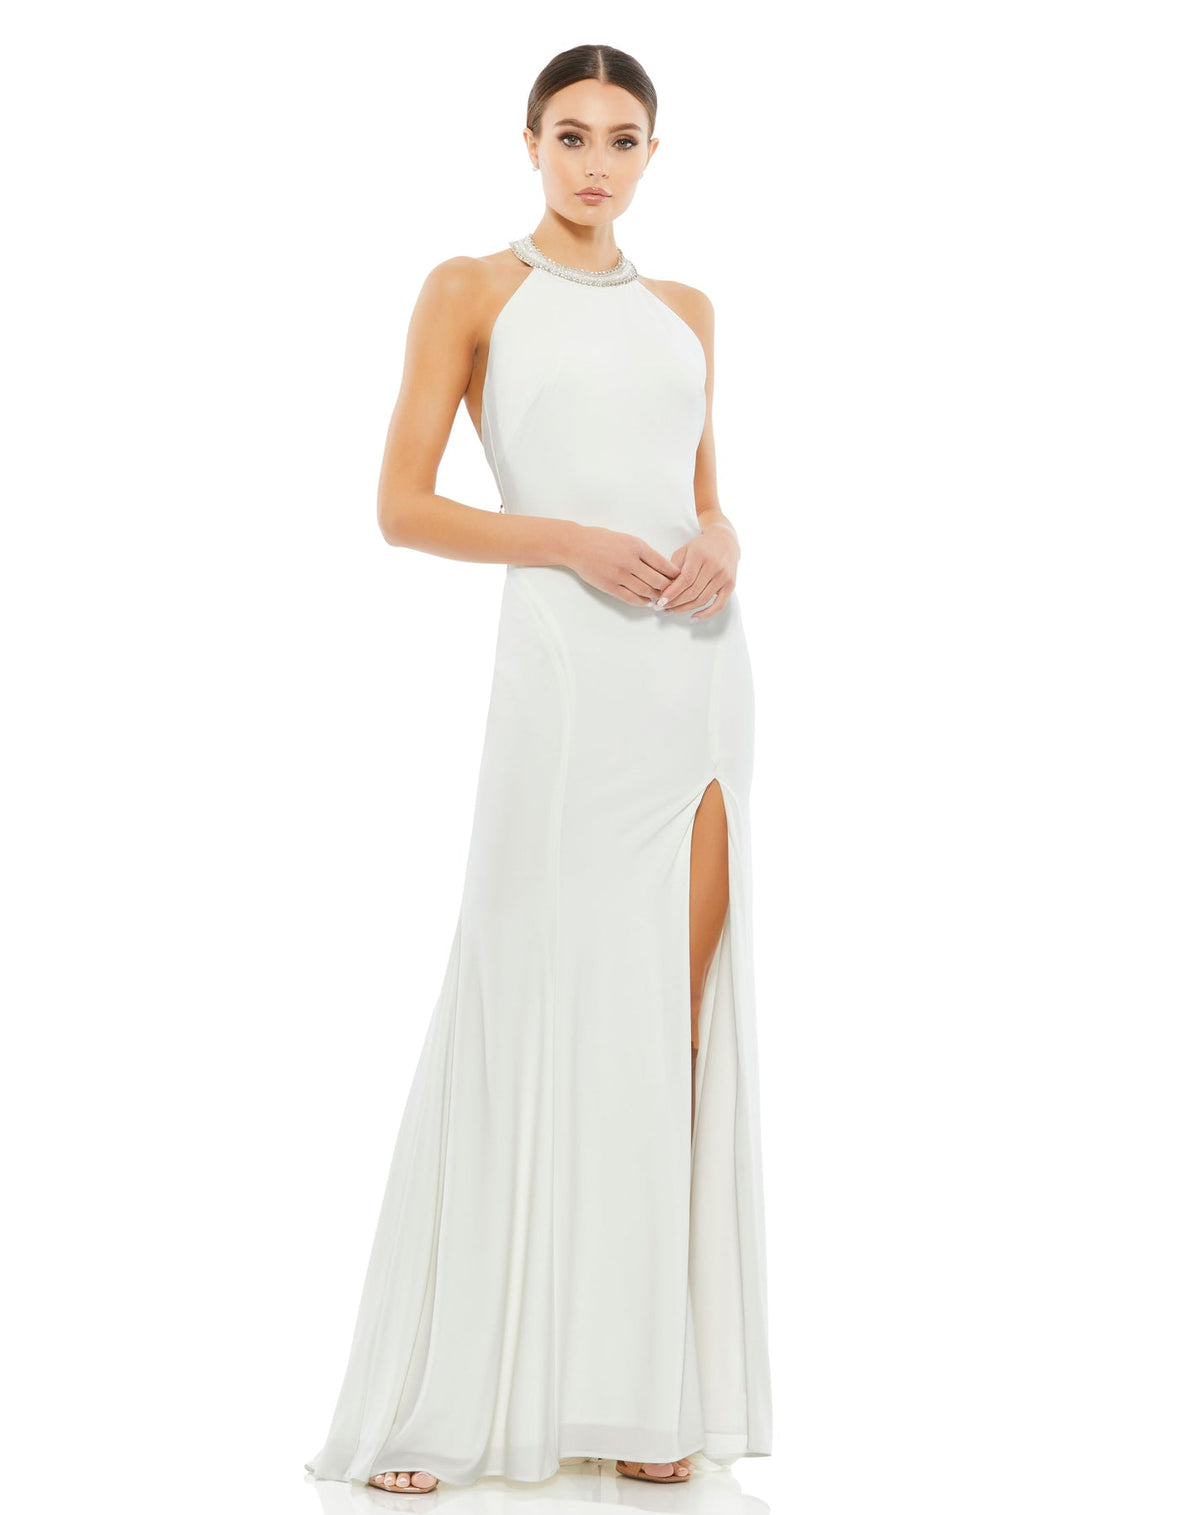 MAC DUGGAL, BEADED HALTER JERSEY GOWN, Style #25572, WHITE